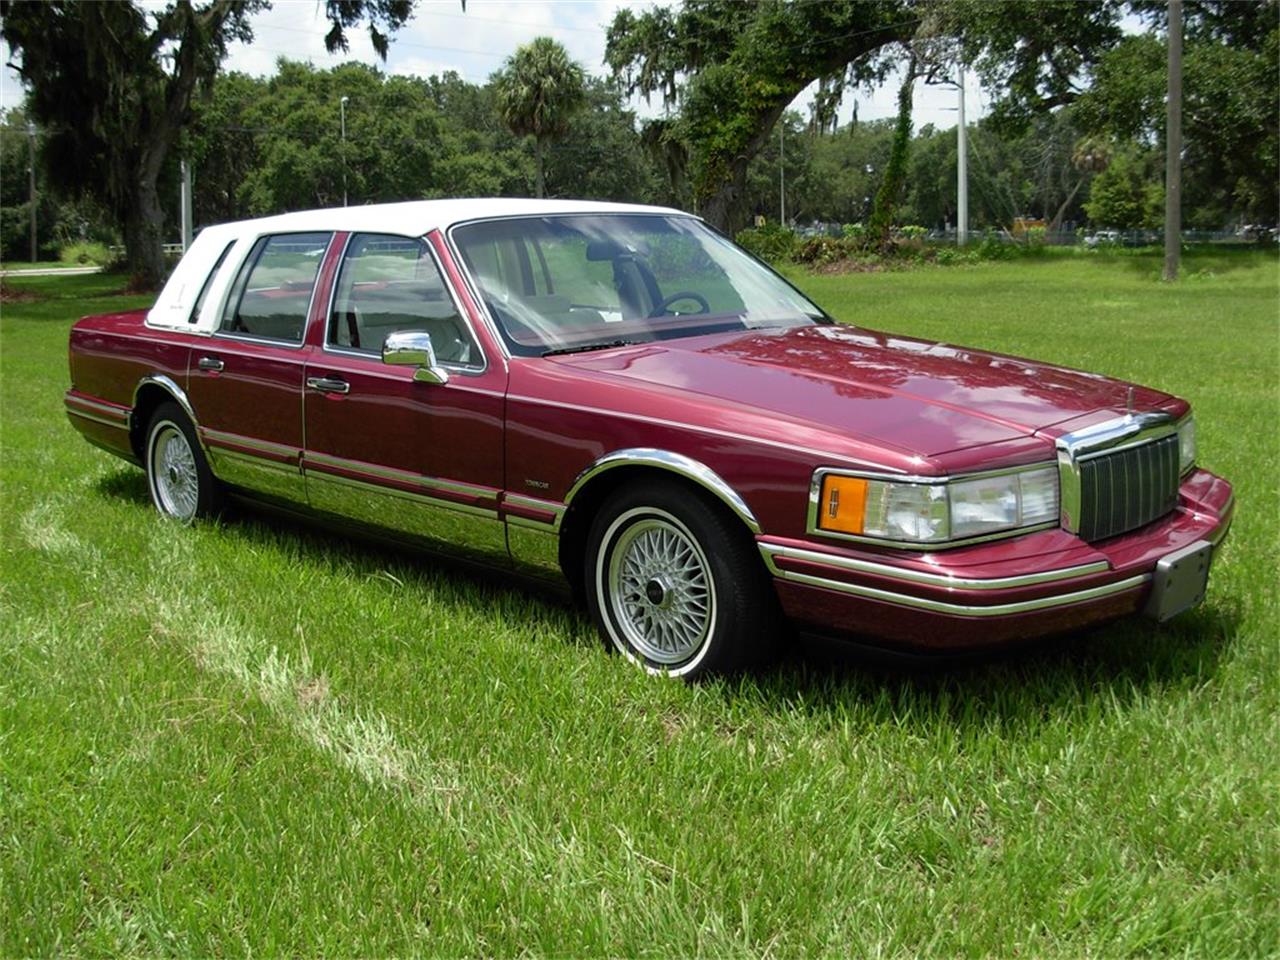 1992 Lincoln Town Car for Sale | ClassicCars.com | CC-1128435